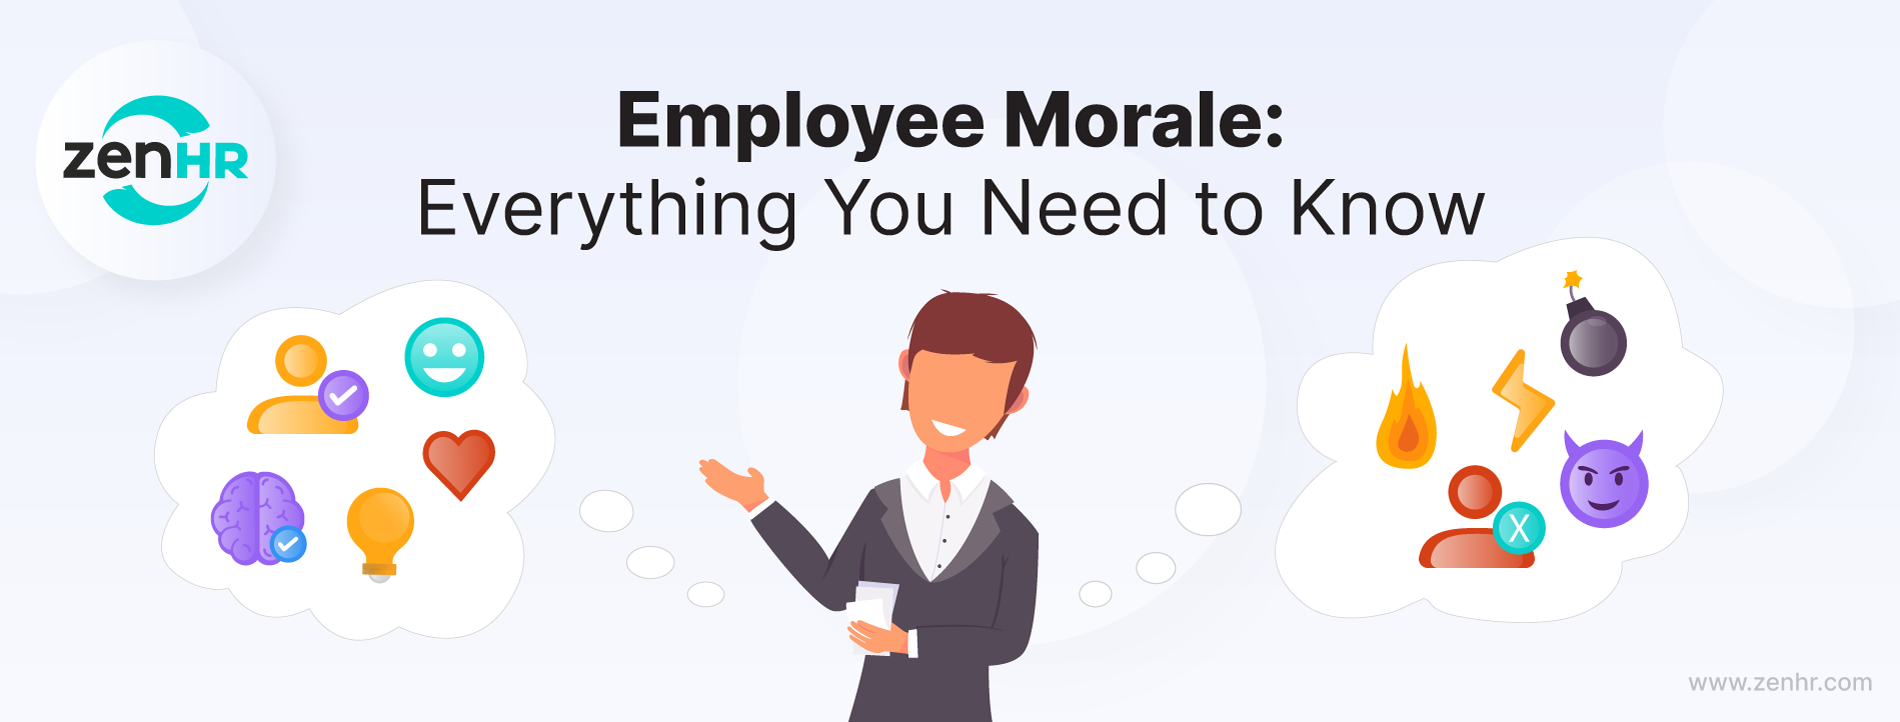 Employee Morale: Everything You Need to Know